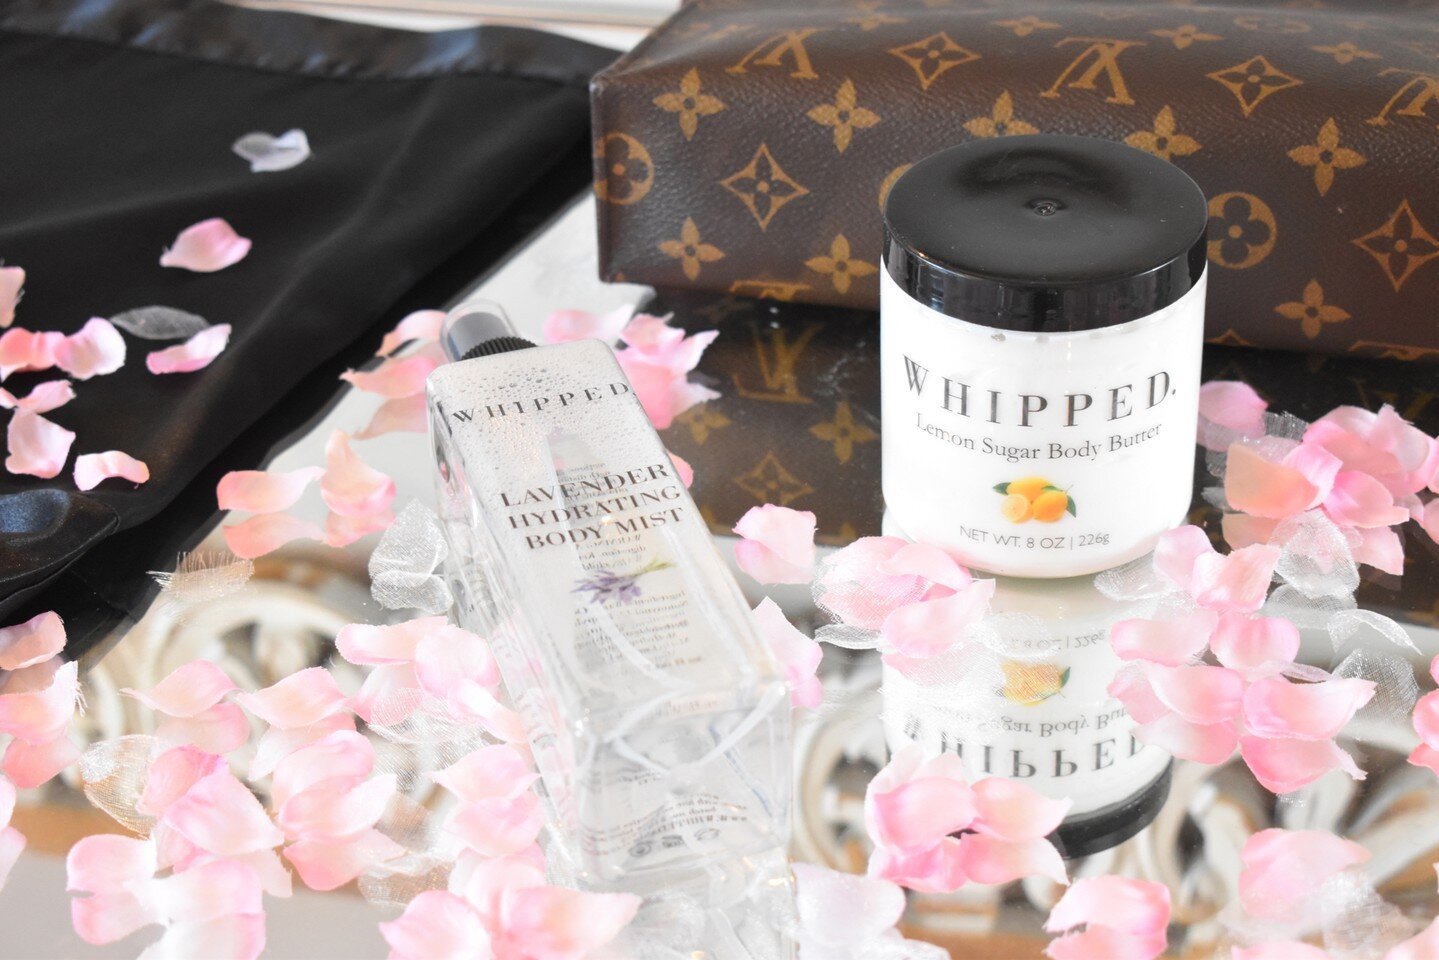 20% OFF WITH CODE &ldquo;LABORDAY&rdquo; AT CHECK OUT 🤩 

&bull;
&bull;
&bull;
#shopnow #shopsmall #whippedandcompany #whippedbodyscrubs #whippedbodybutters #whipped #coffee #westhamptonbeach #gift #getwhipped #whippedcosmetics #brobutter #bro #mois